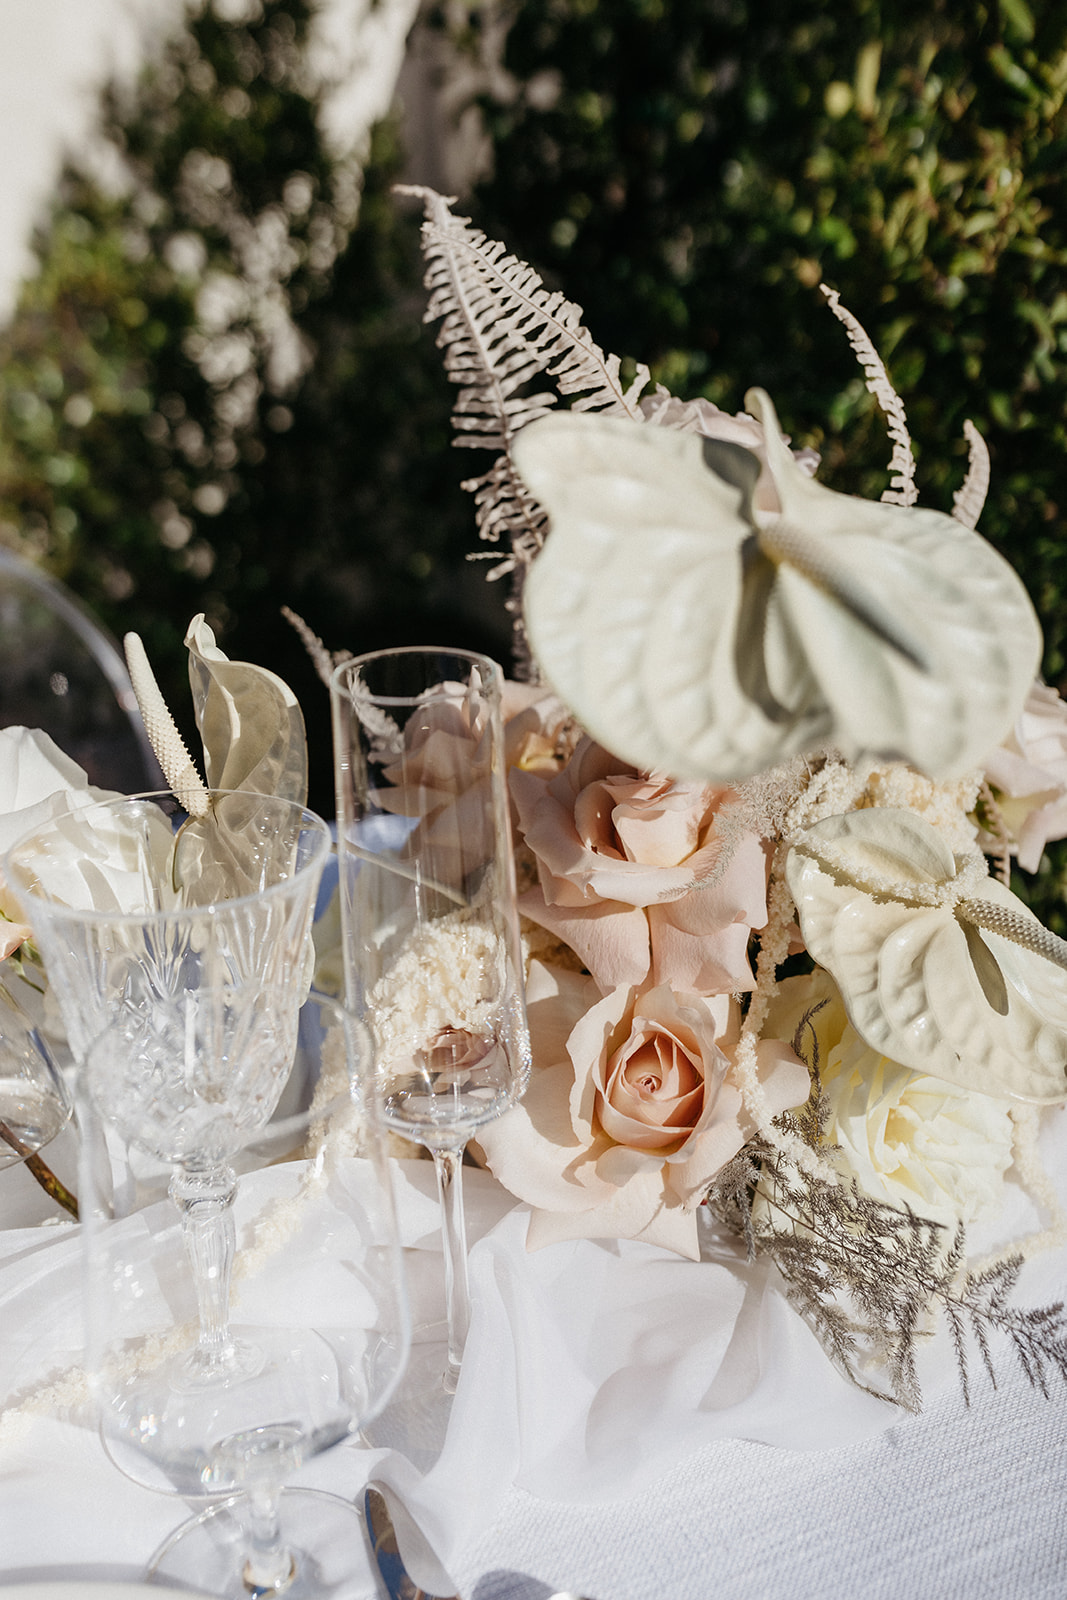 Champagne Glasses on Reception Table with Florals with White Anthurium 